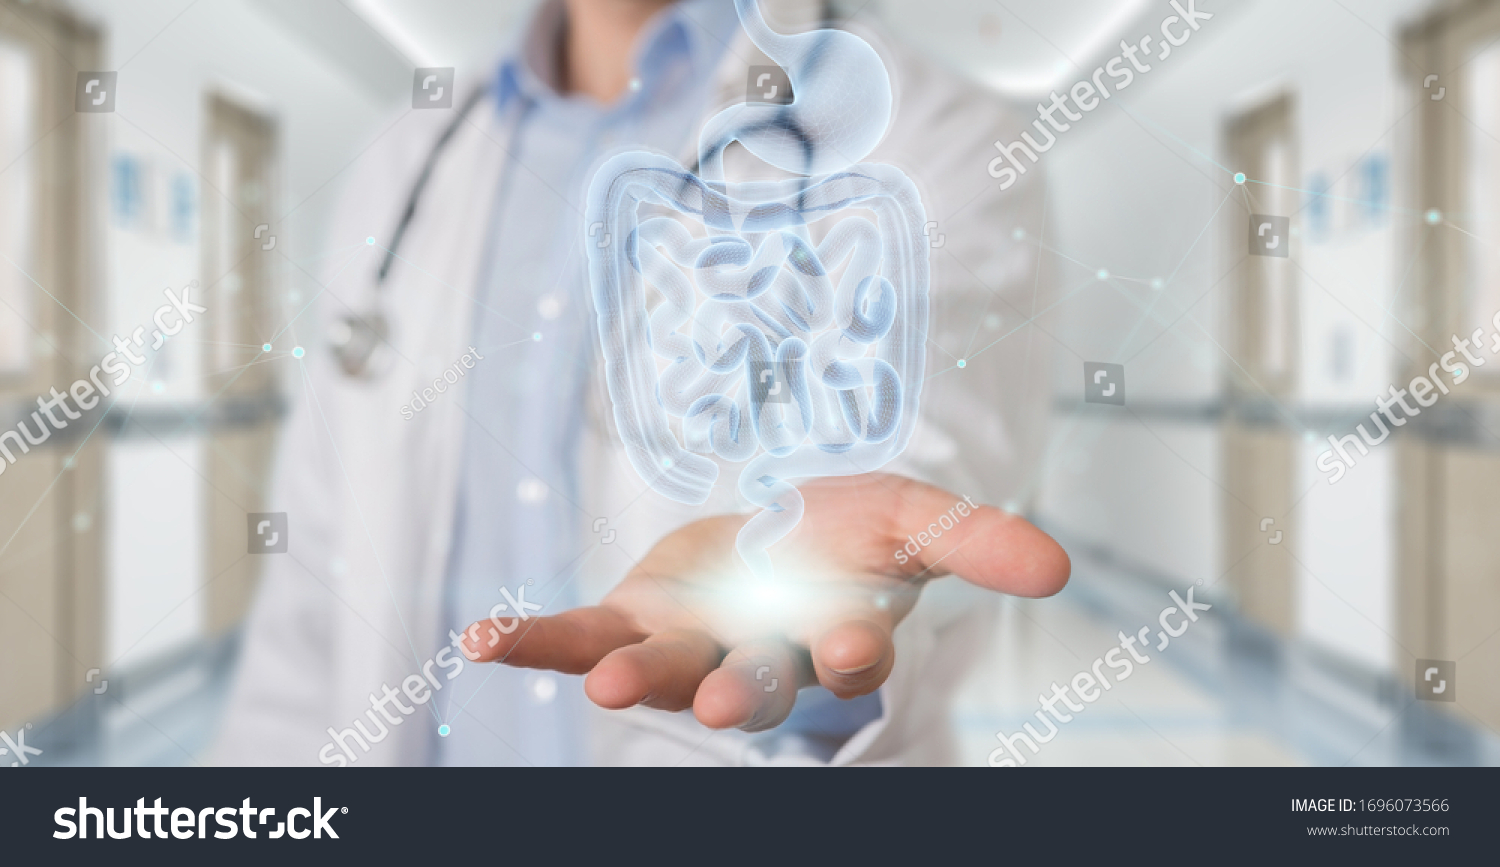 Gastroenterologist on blurred background using digital x-ray of human intestine holographic scan projection 3D rendering #1696073566